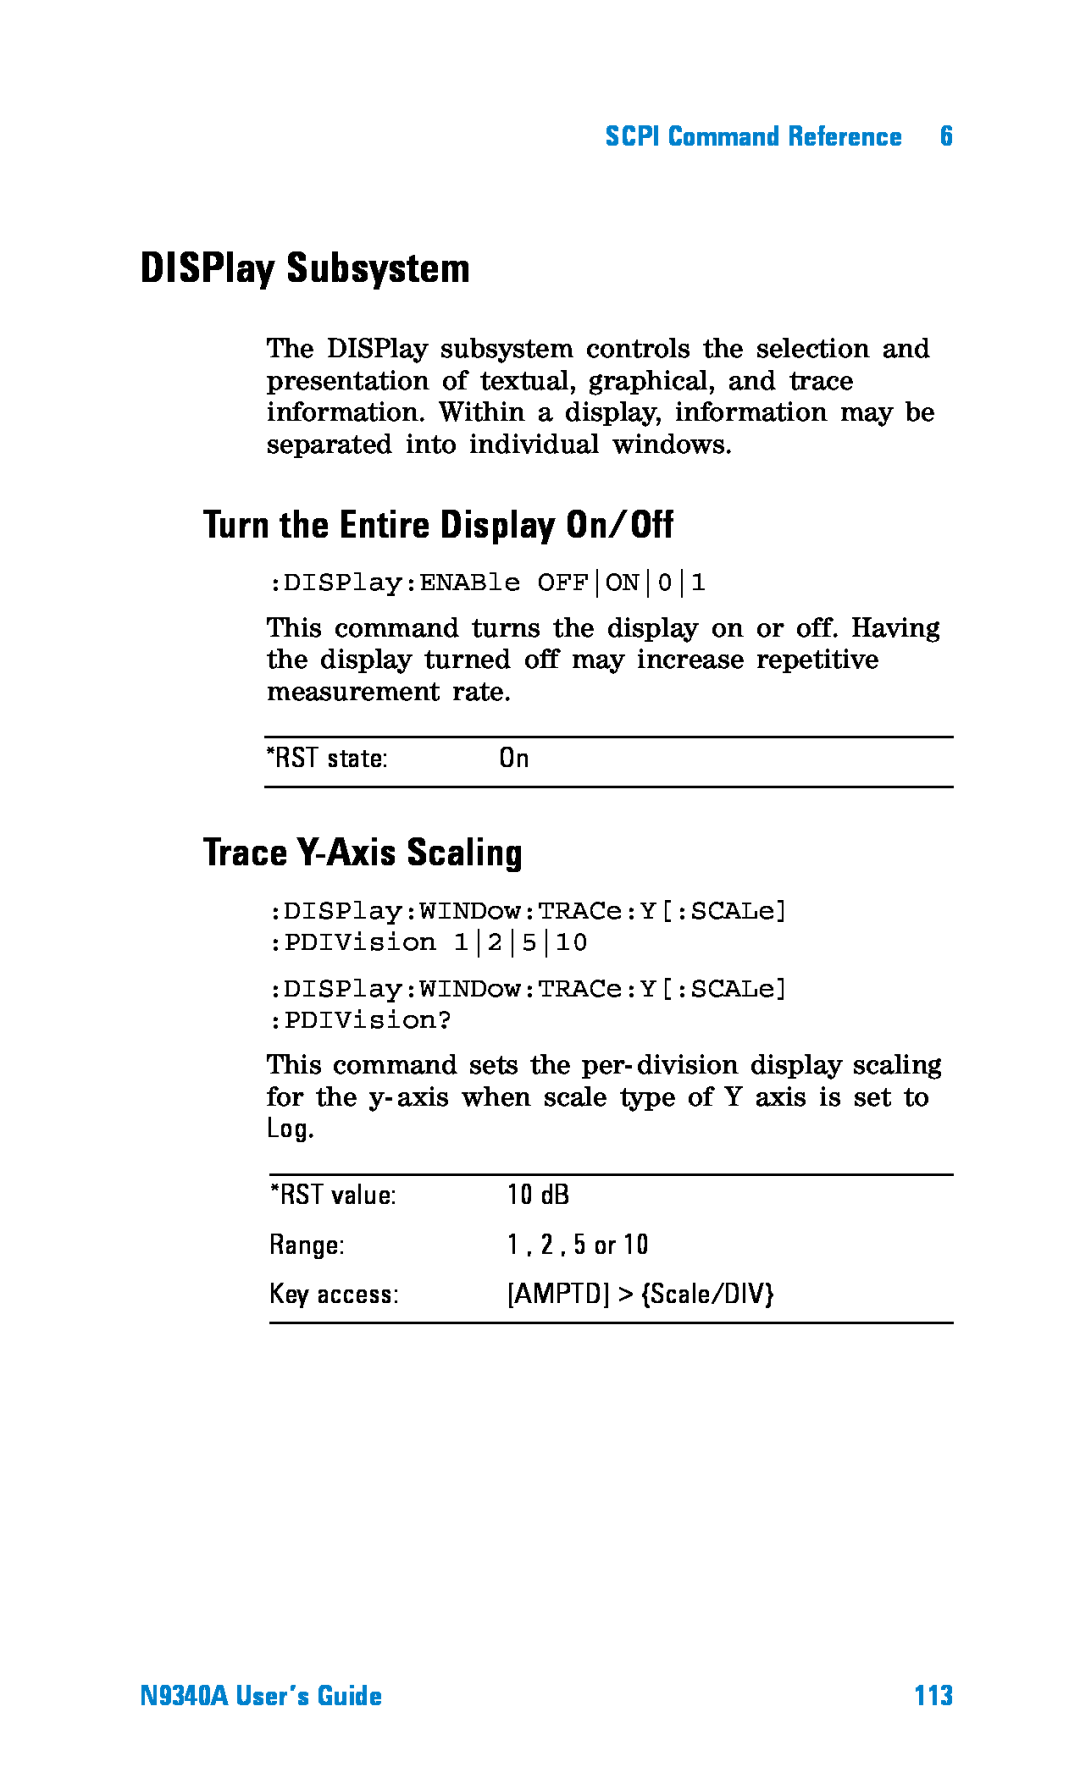 Agilent Technologies manual DISPlay Subsystem, Turn the Entire Display On/Off, Trace Y-Axis Scaling, N9340A User’s Guide 